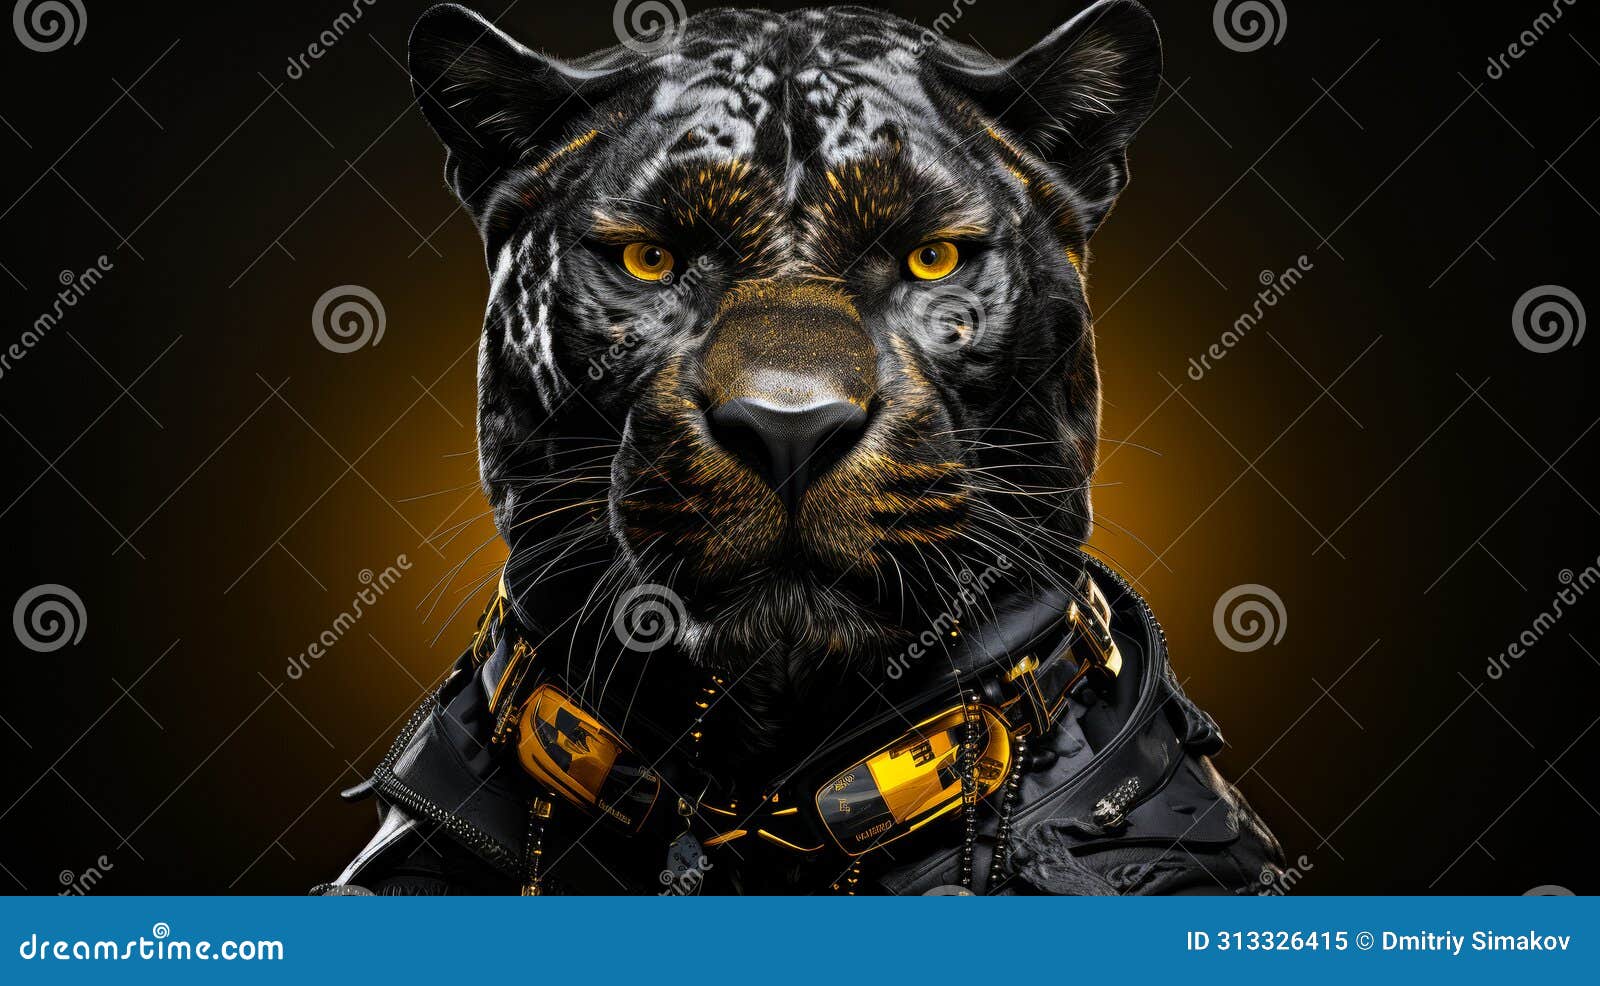 envision a sleek panther